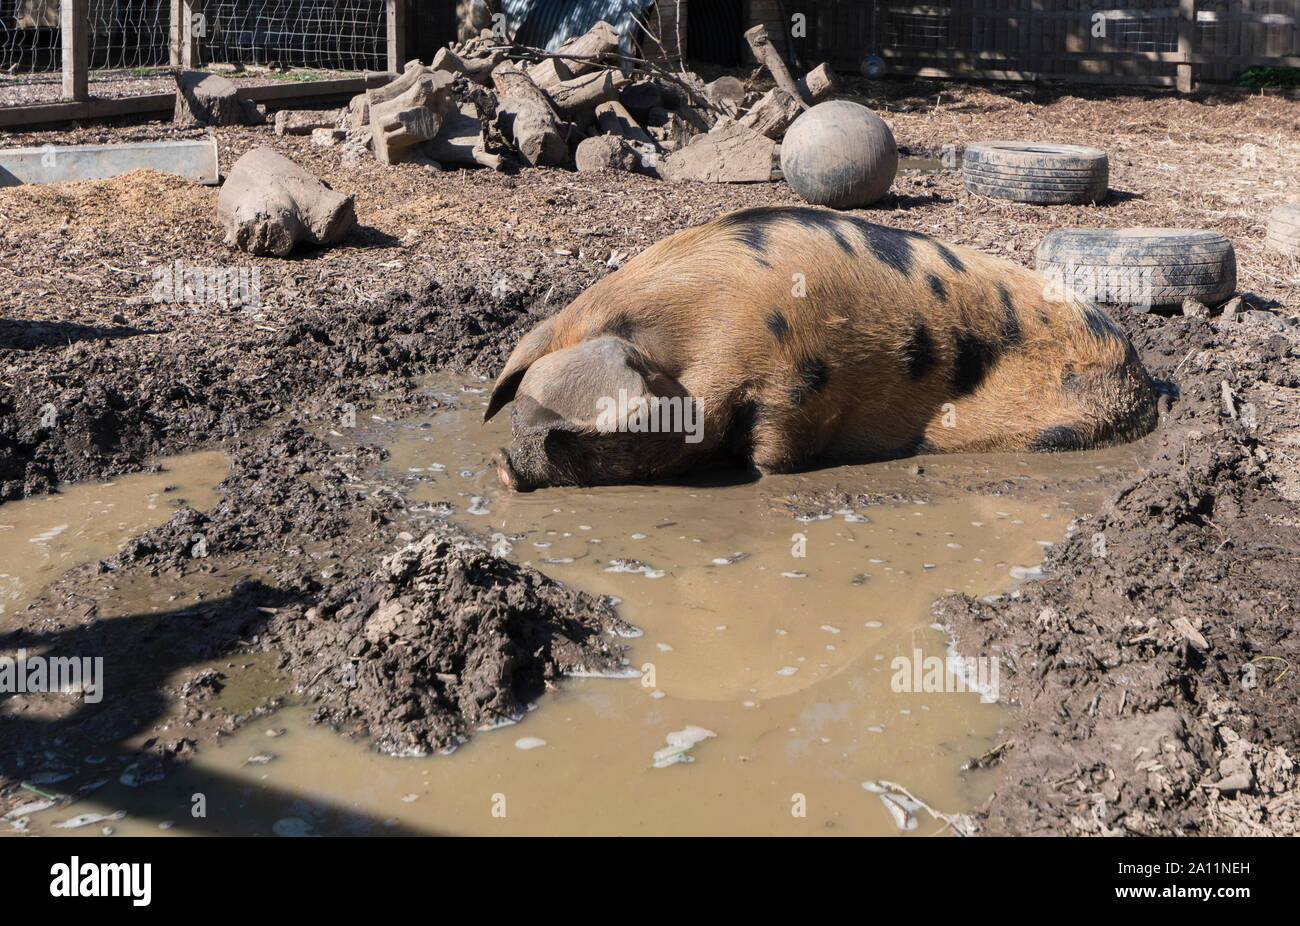 Pig rolling in mud at Dales Farm at Ferring Country Centre in Ferring, West Sussex, UK. Pig in mud. Stock Photo